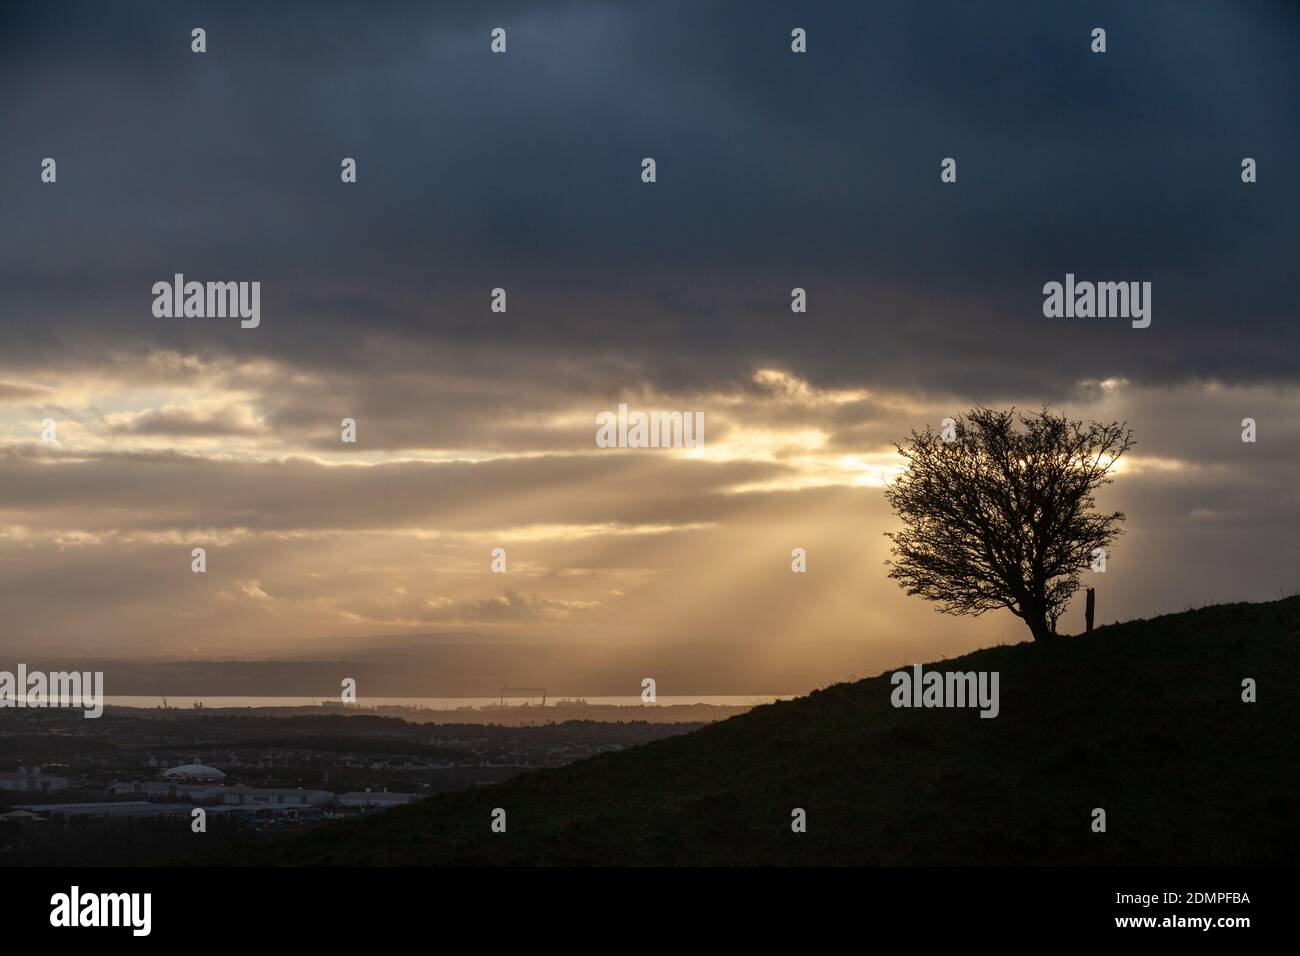 A single tree on the Hill of Beath over looking the Firth Of Forth with a dramatic sky, Fife, Scotland Stock Photo